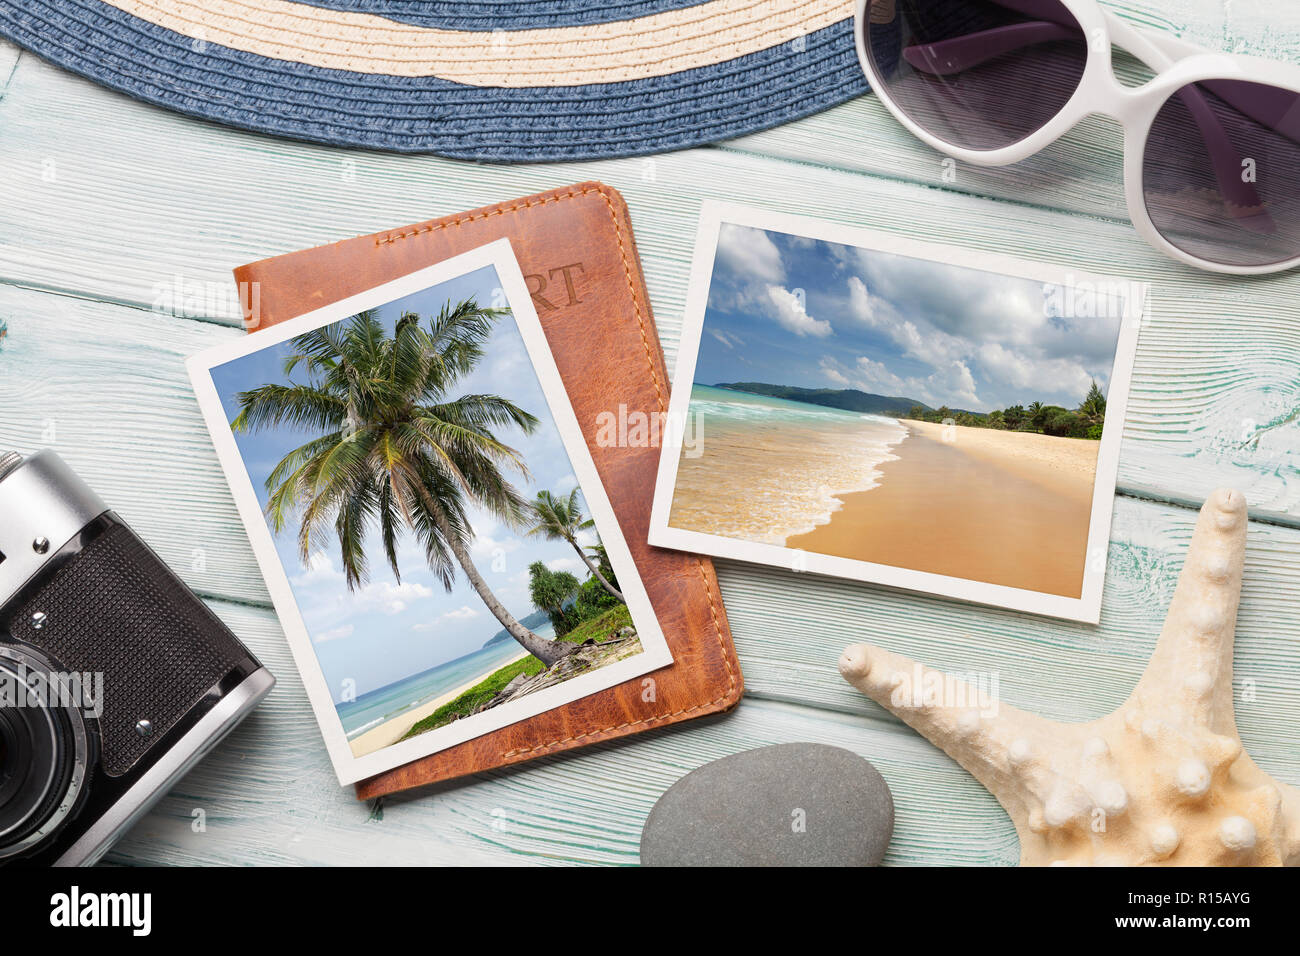 Travel vacation table concept with camera, passport and summer photos on wooden table. Top view. Flat lay. Photos taken by me. Stock Photo